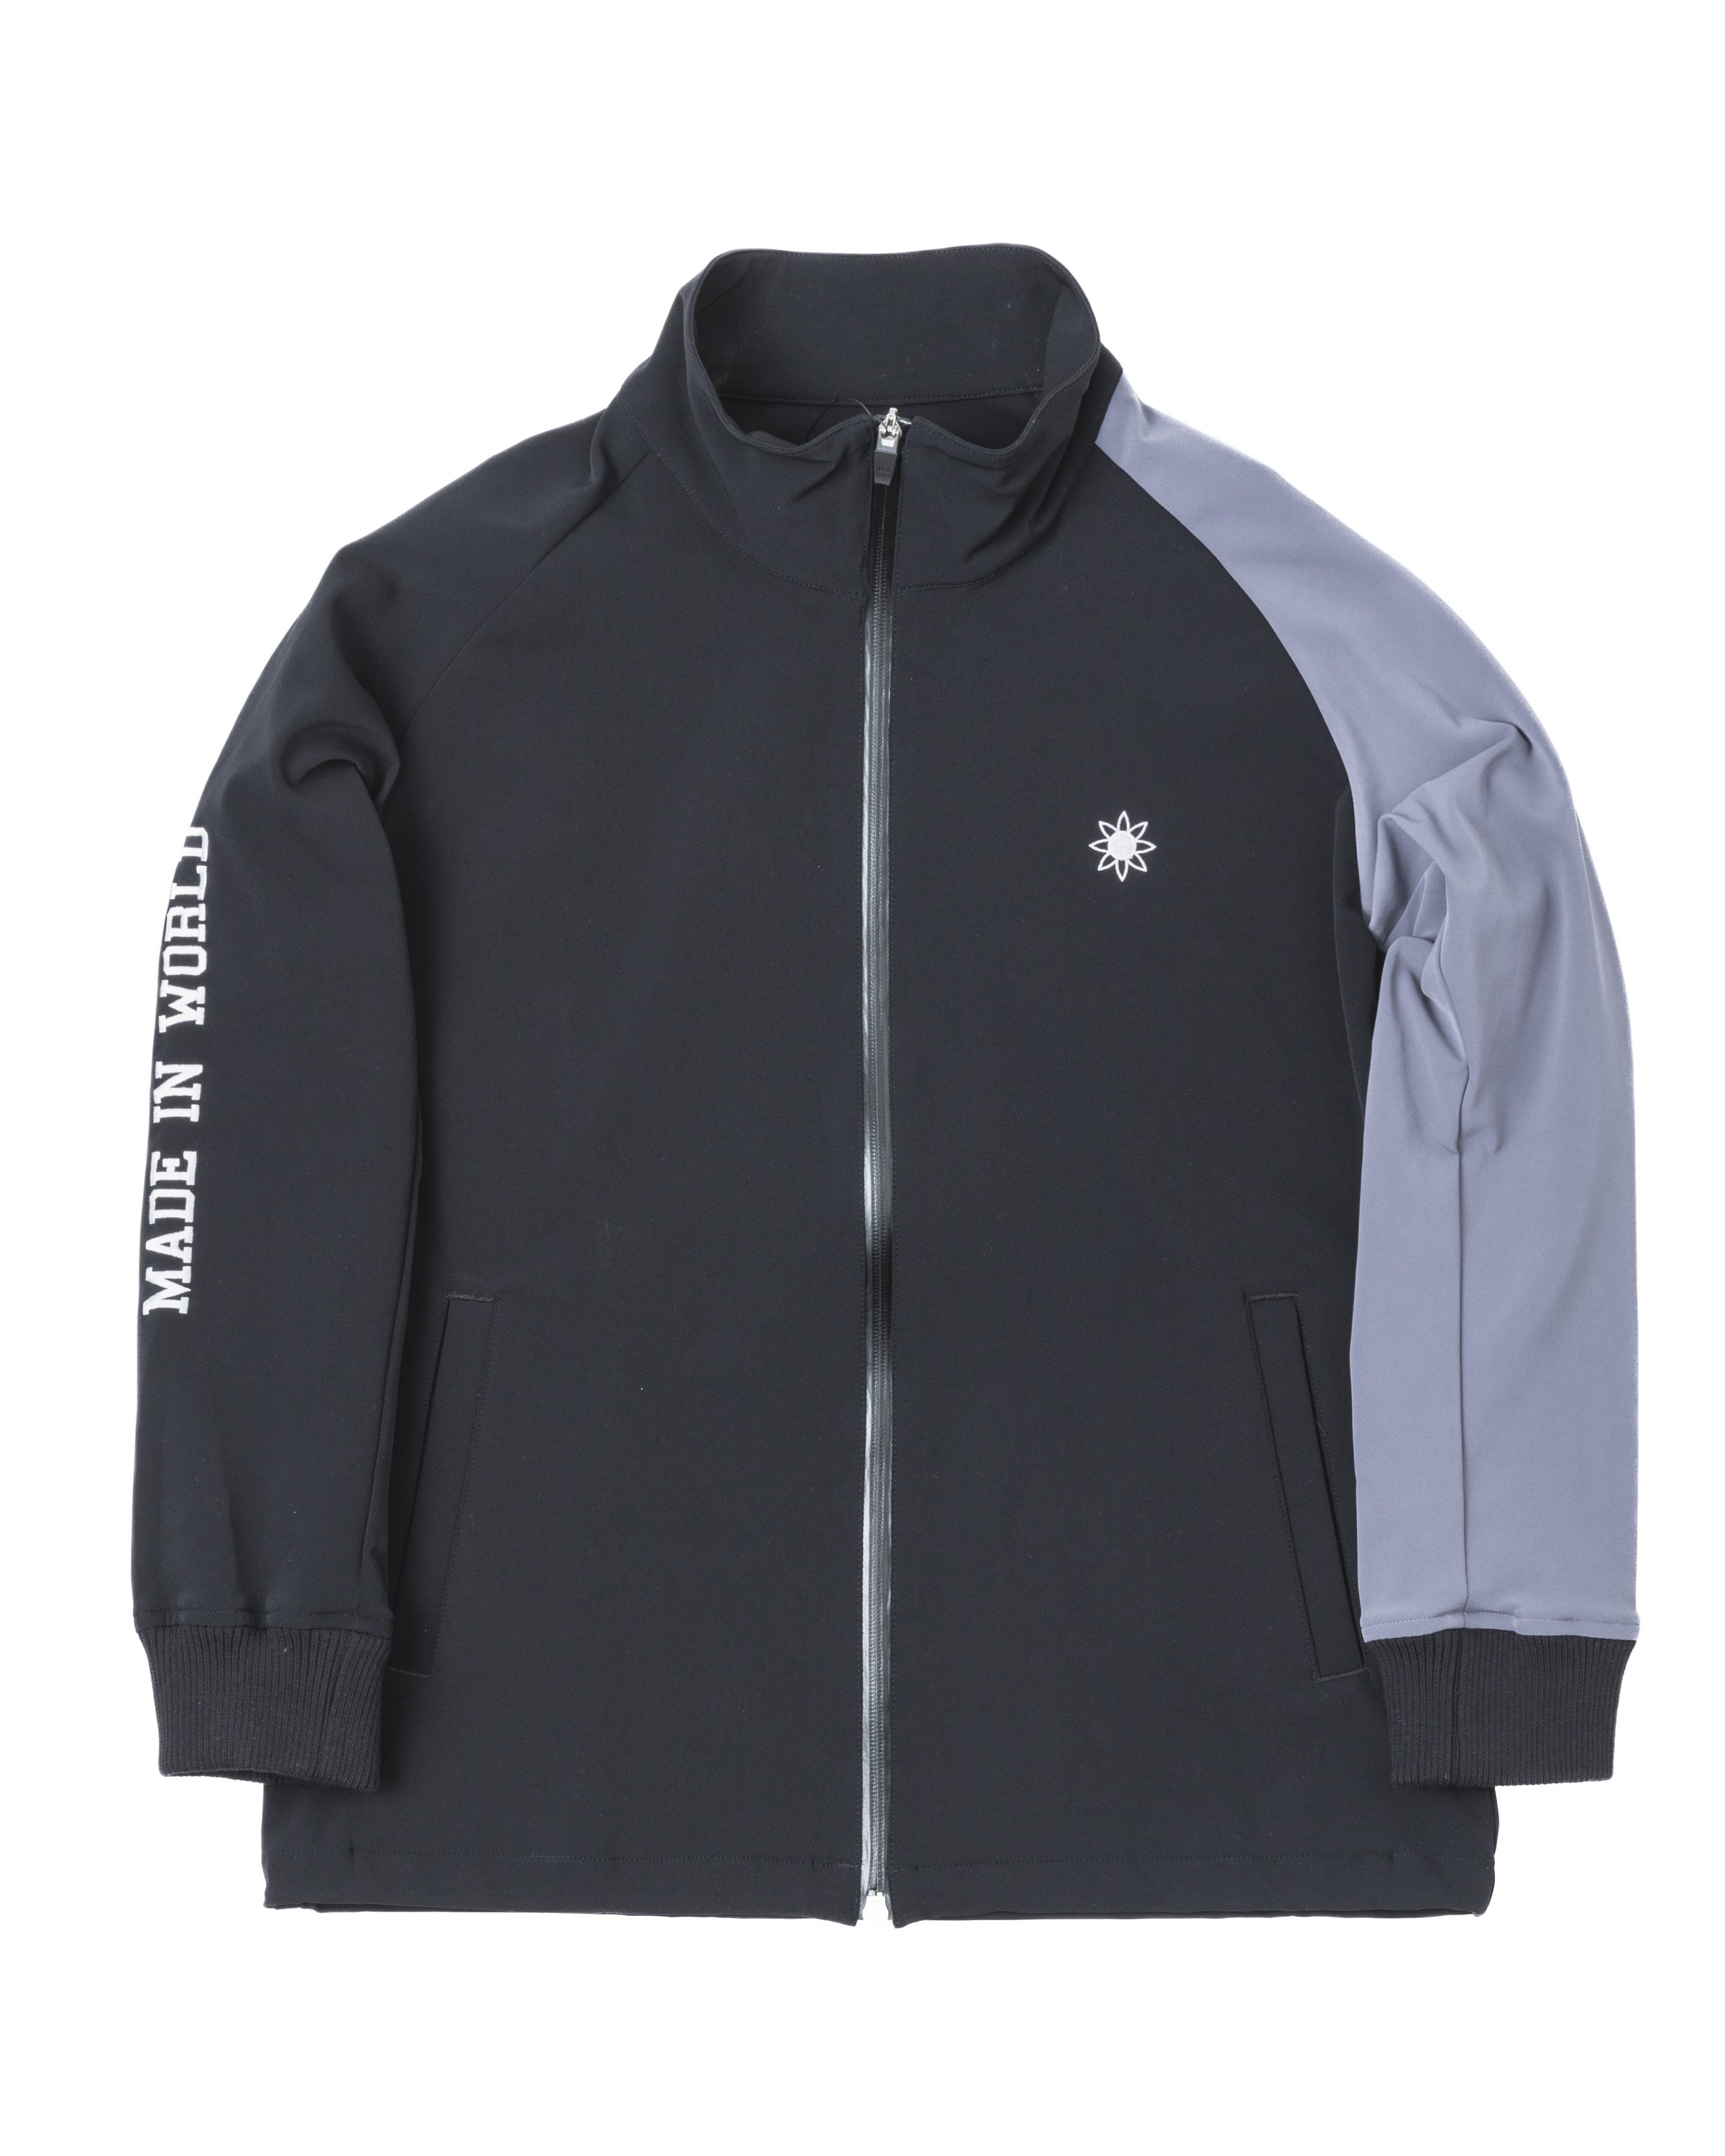 <img class='new_mark_img1' src='https://img.shop-pro.jp/img/new/icons14.gif' style='border:none;display:inline;margin:0px;padding:0px;width:auto;' />TRACK JACKET<br />black